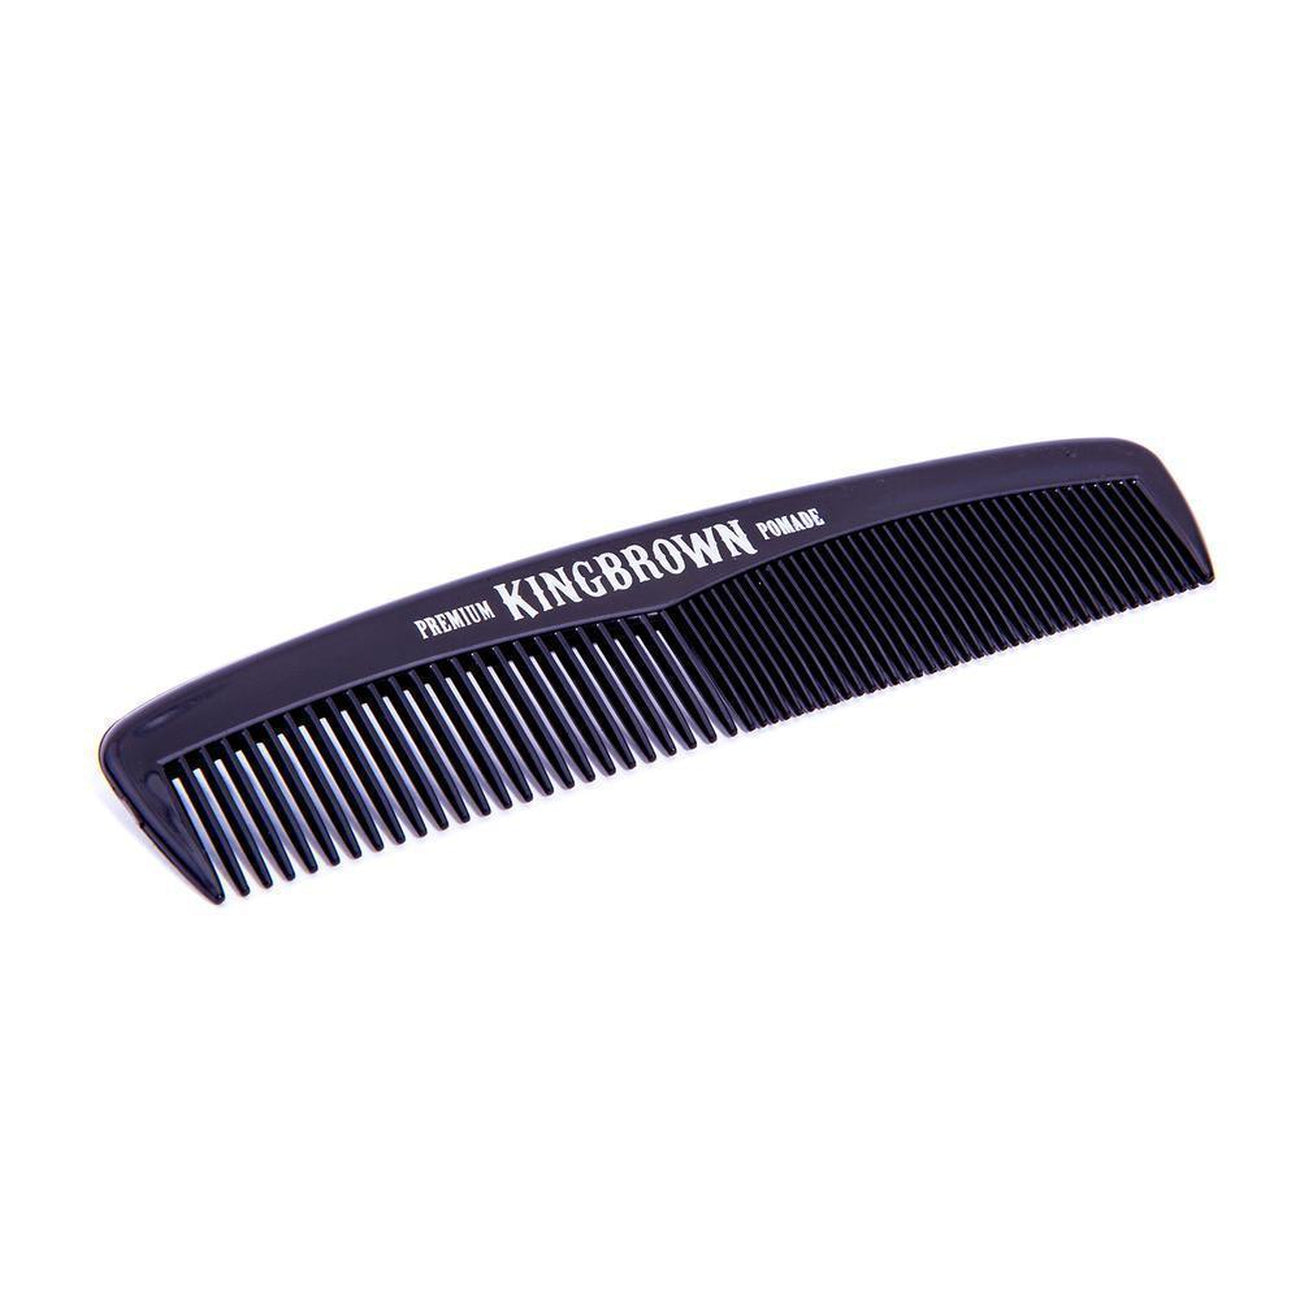 King Brown Black Comb-The Pomade Shop